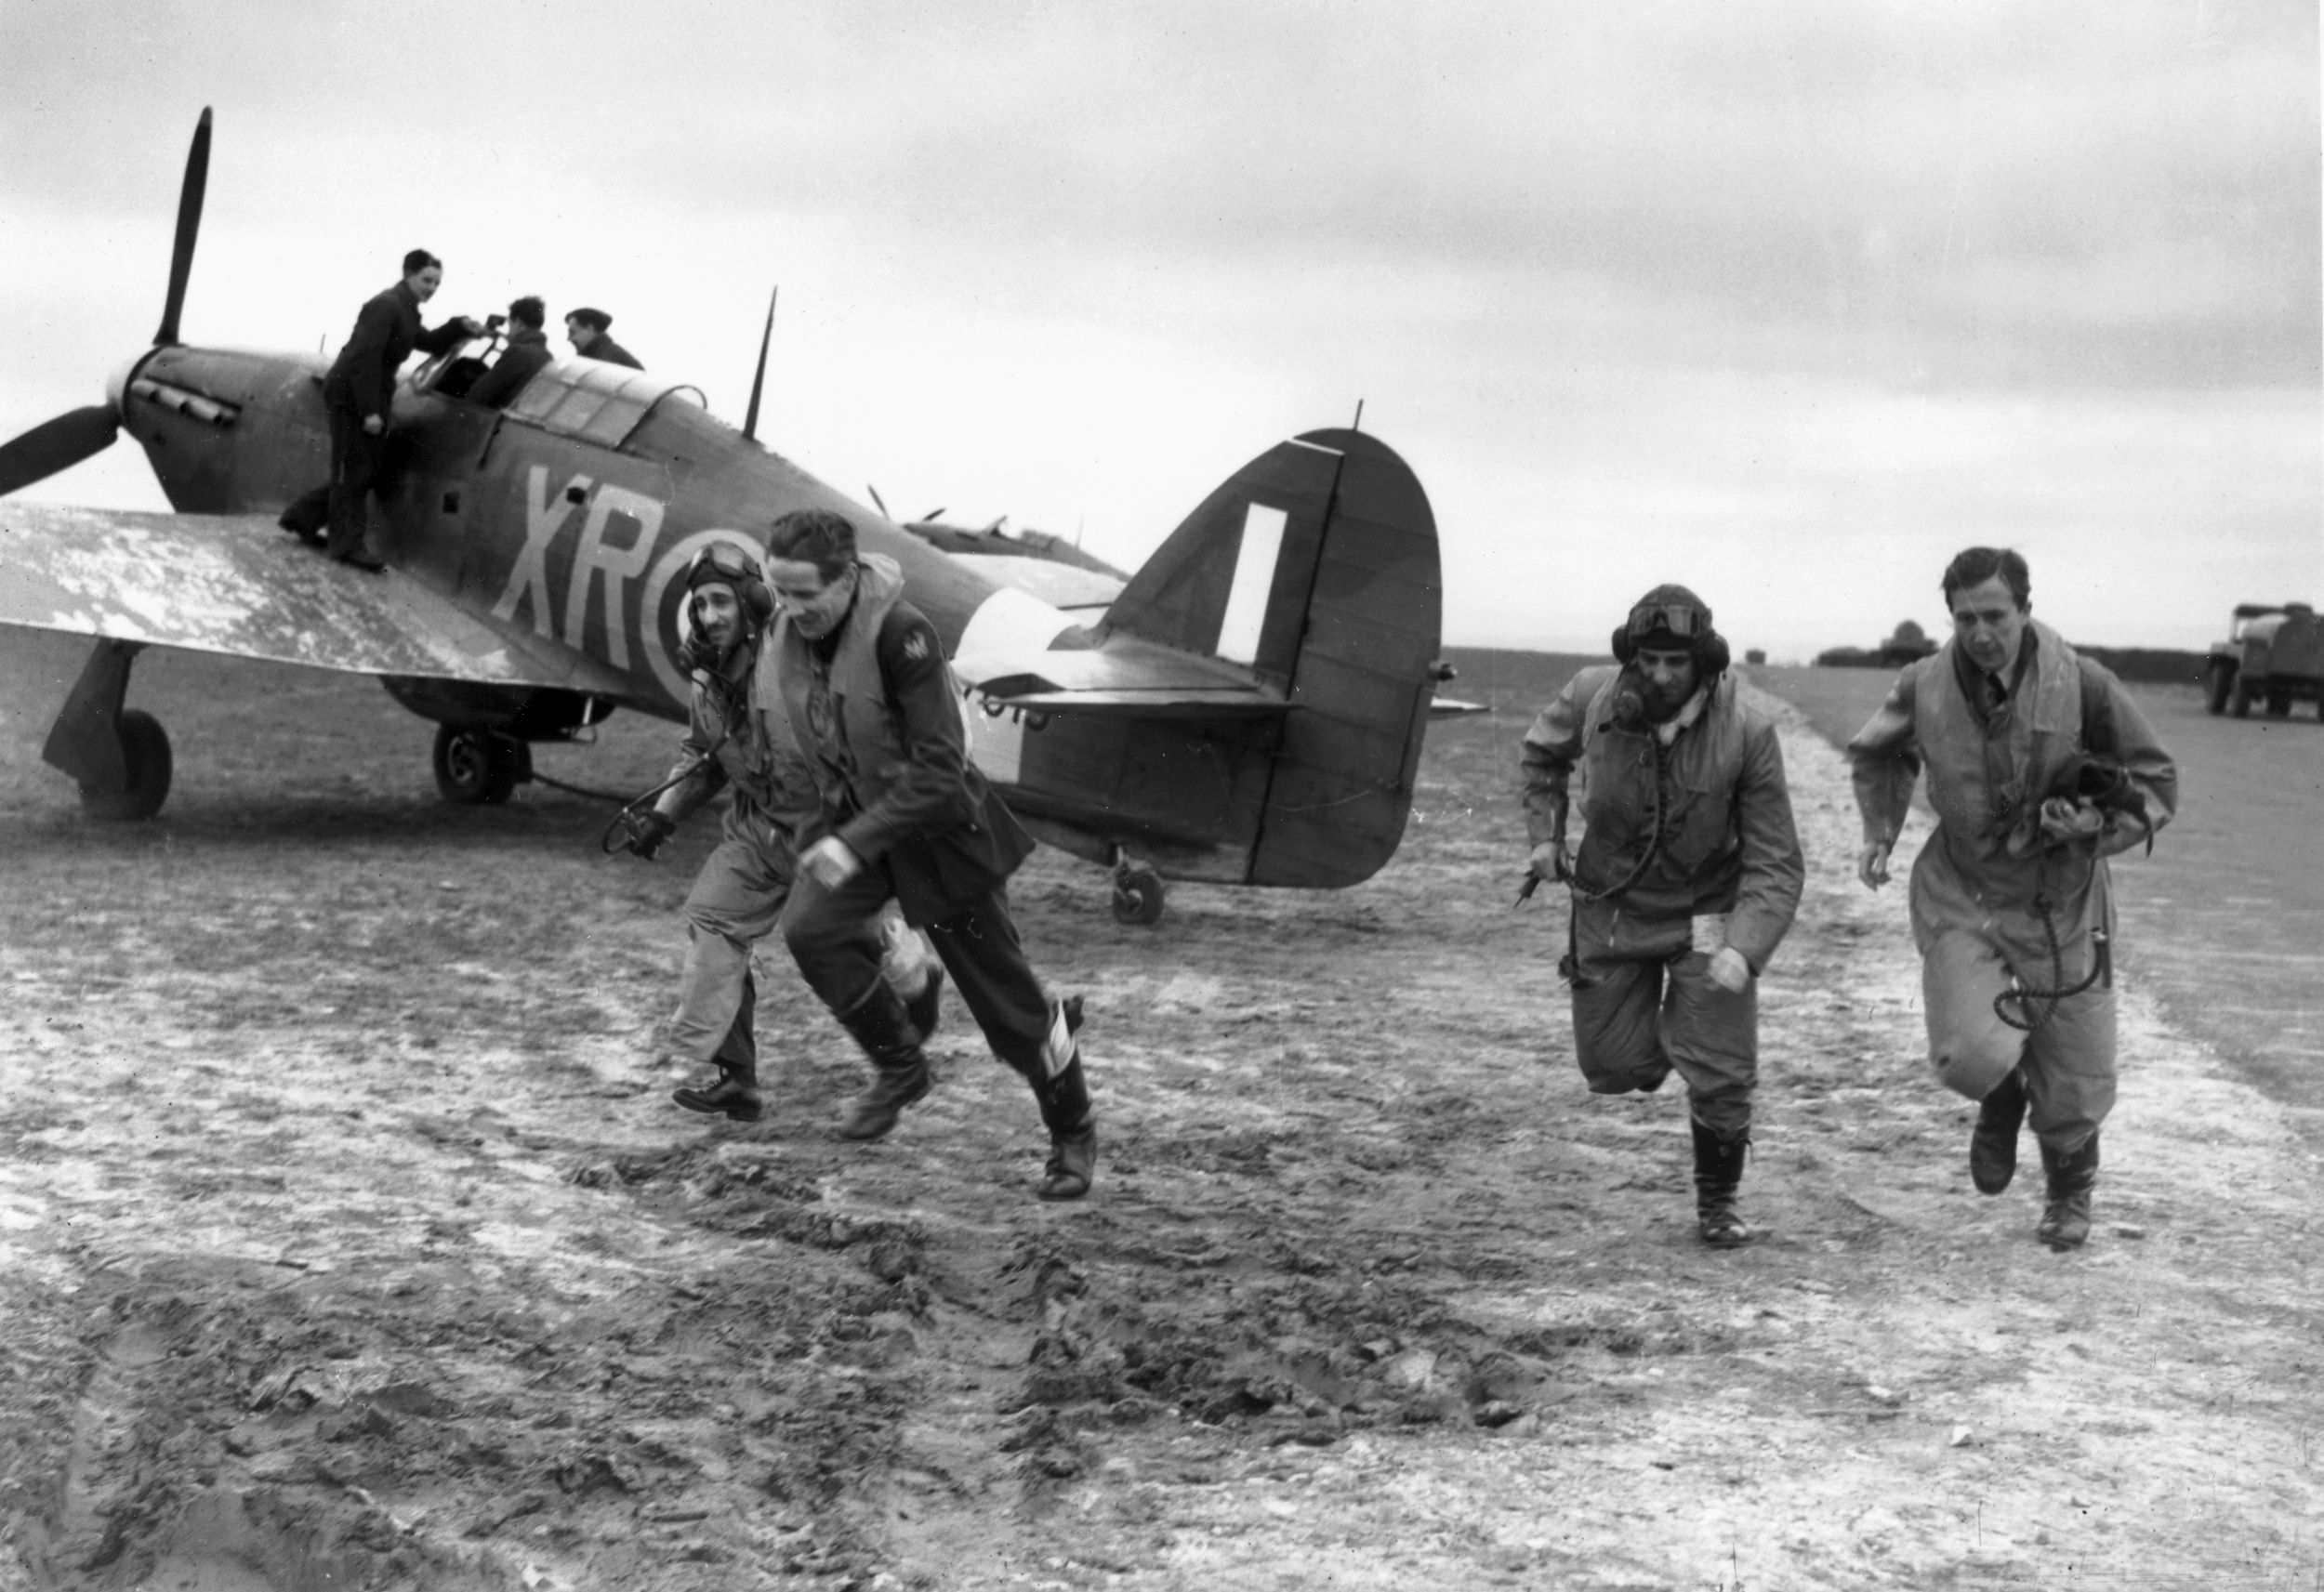 “Ring the bell and run like hell.” American pilots of 71 Squadron sprint to their planes as the order to “scramble” is received at RAF Martlesham Heath.